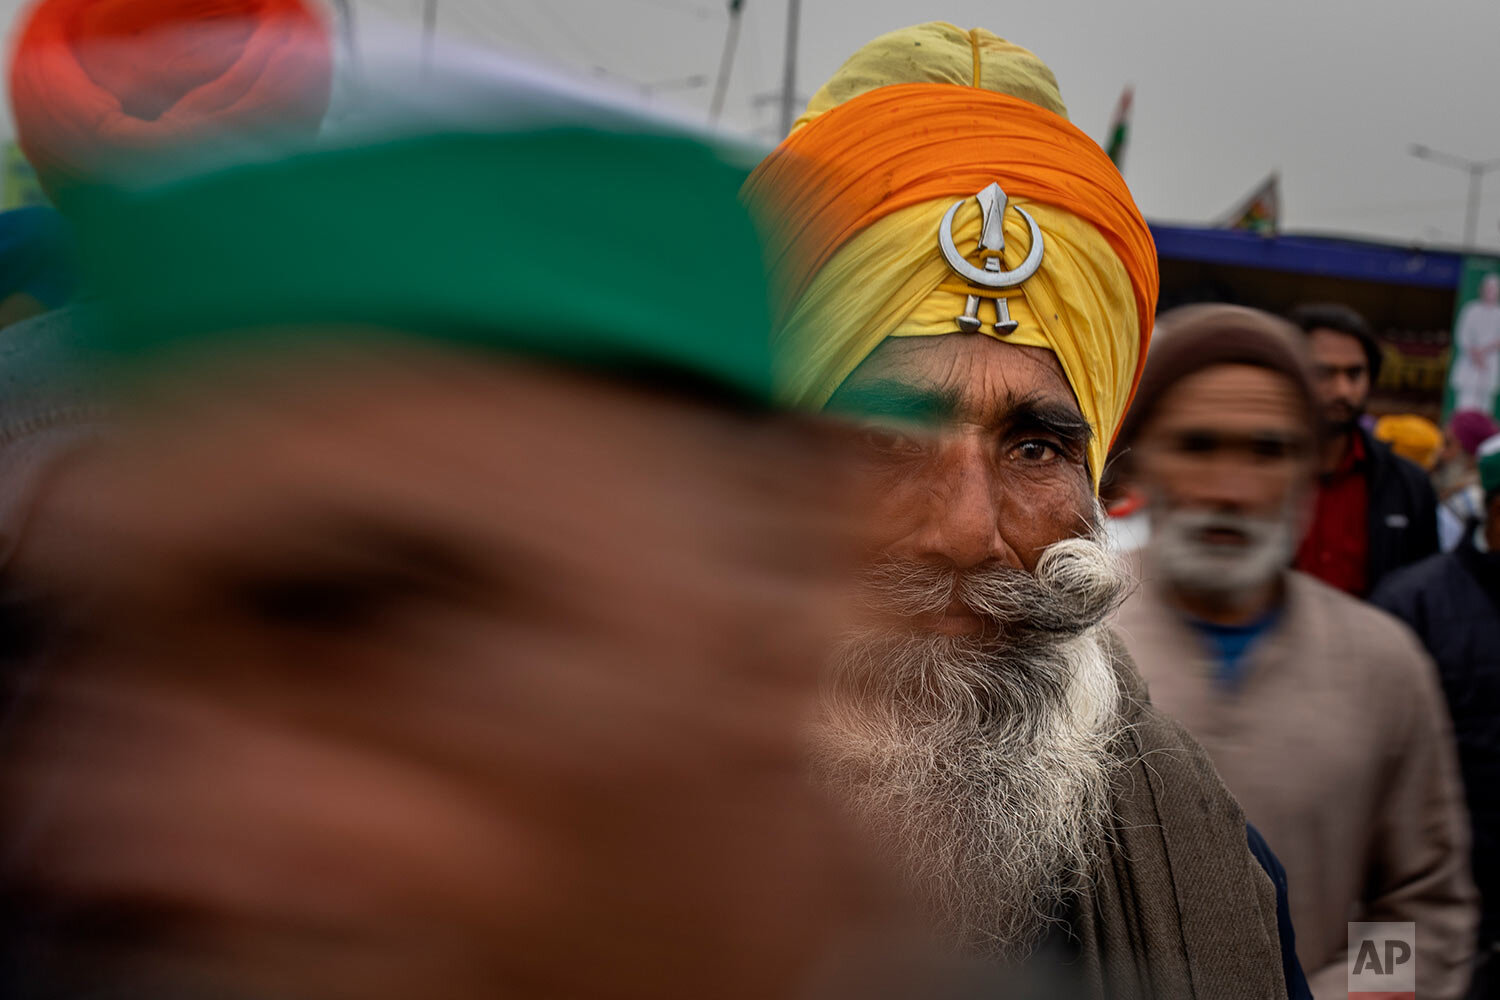  Farmers walk away from the stage as it starts raining during a protest against new farm laws at the Delhi-Uttar Pradesh state border, India, Monday, Jan. 4, 2021. (AP Photo/Altaf Qadri) 